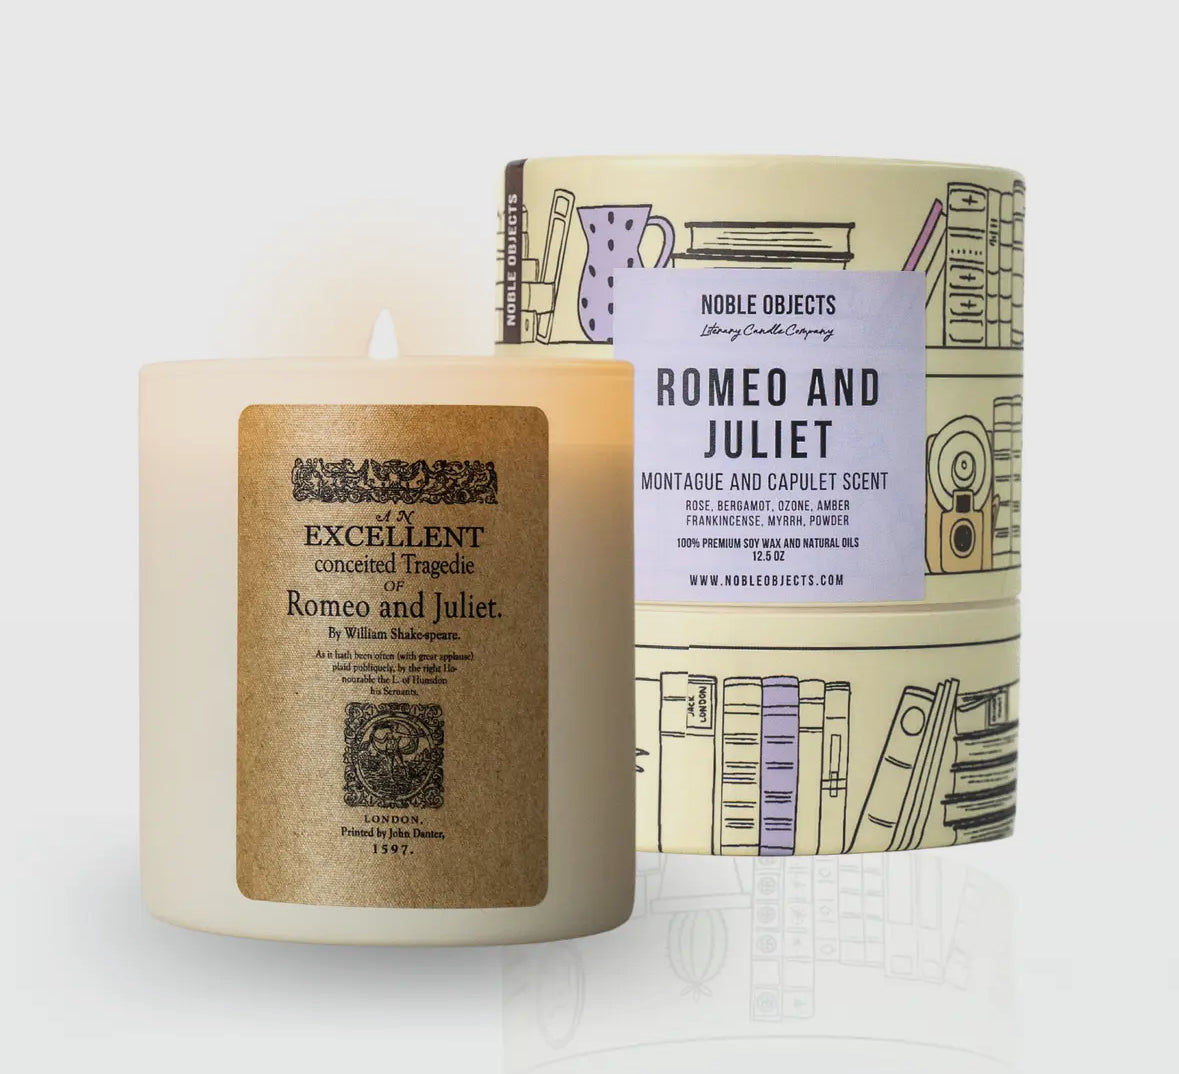 Book Lover Candle